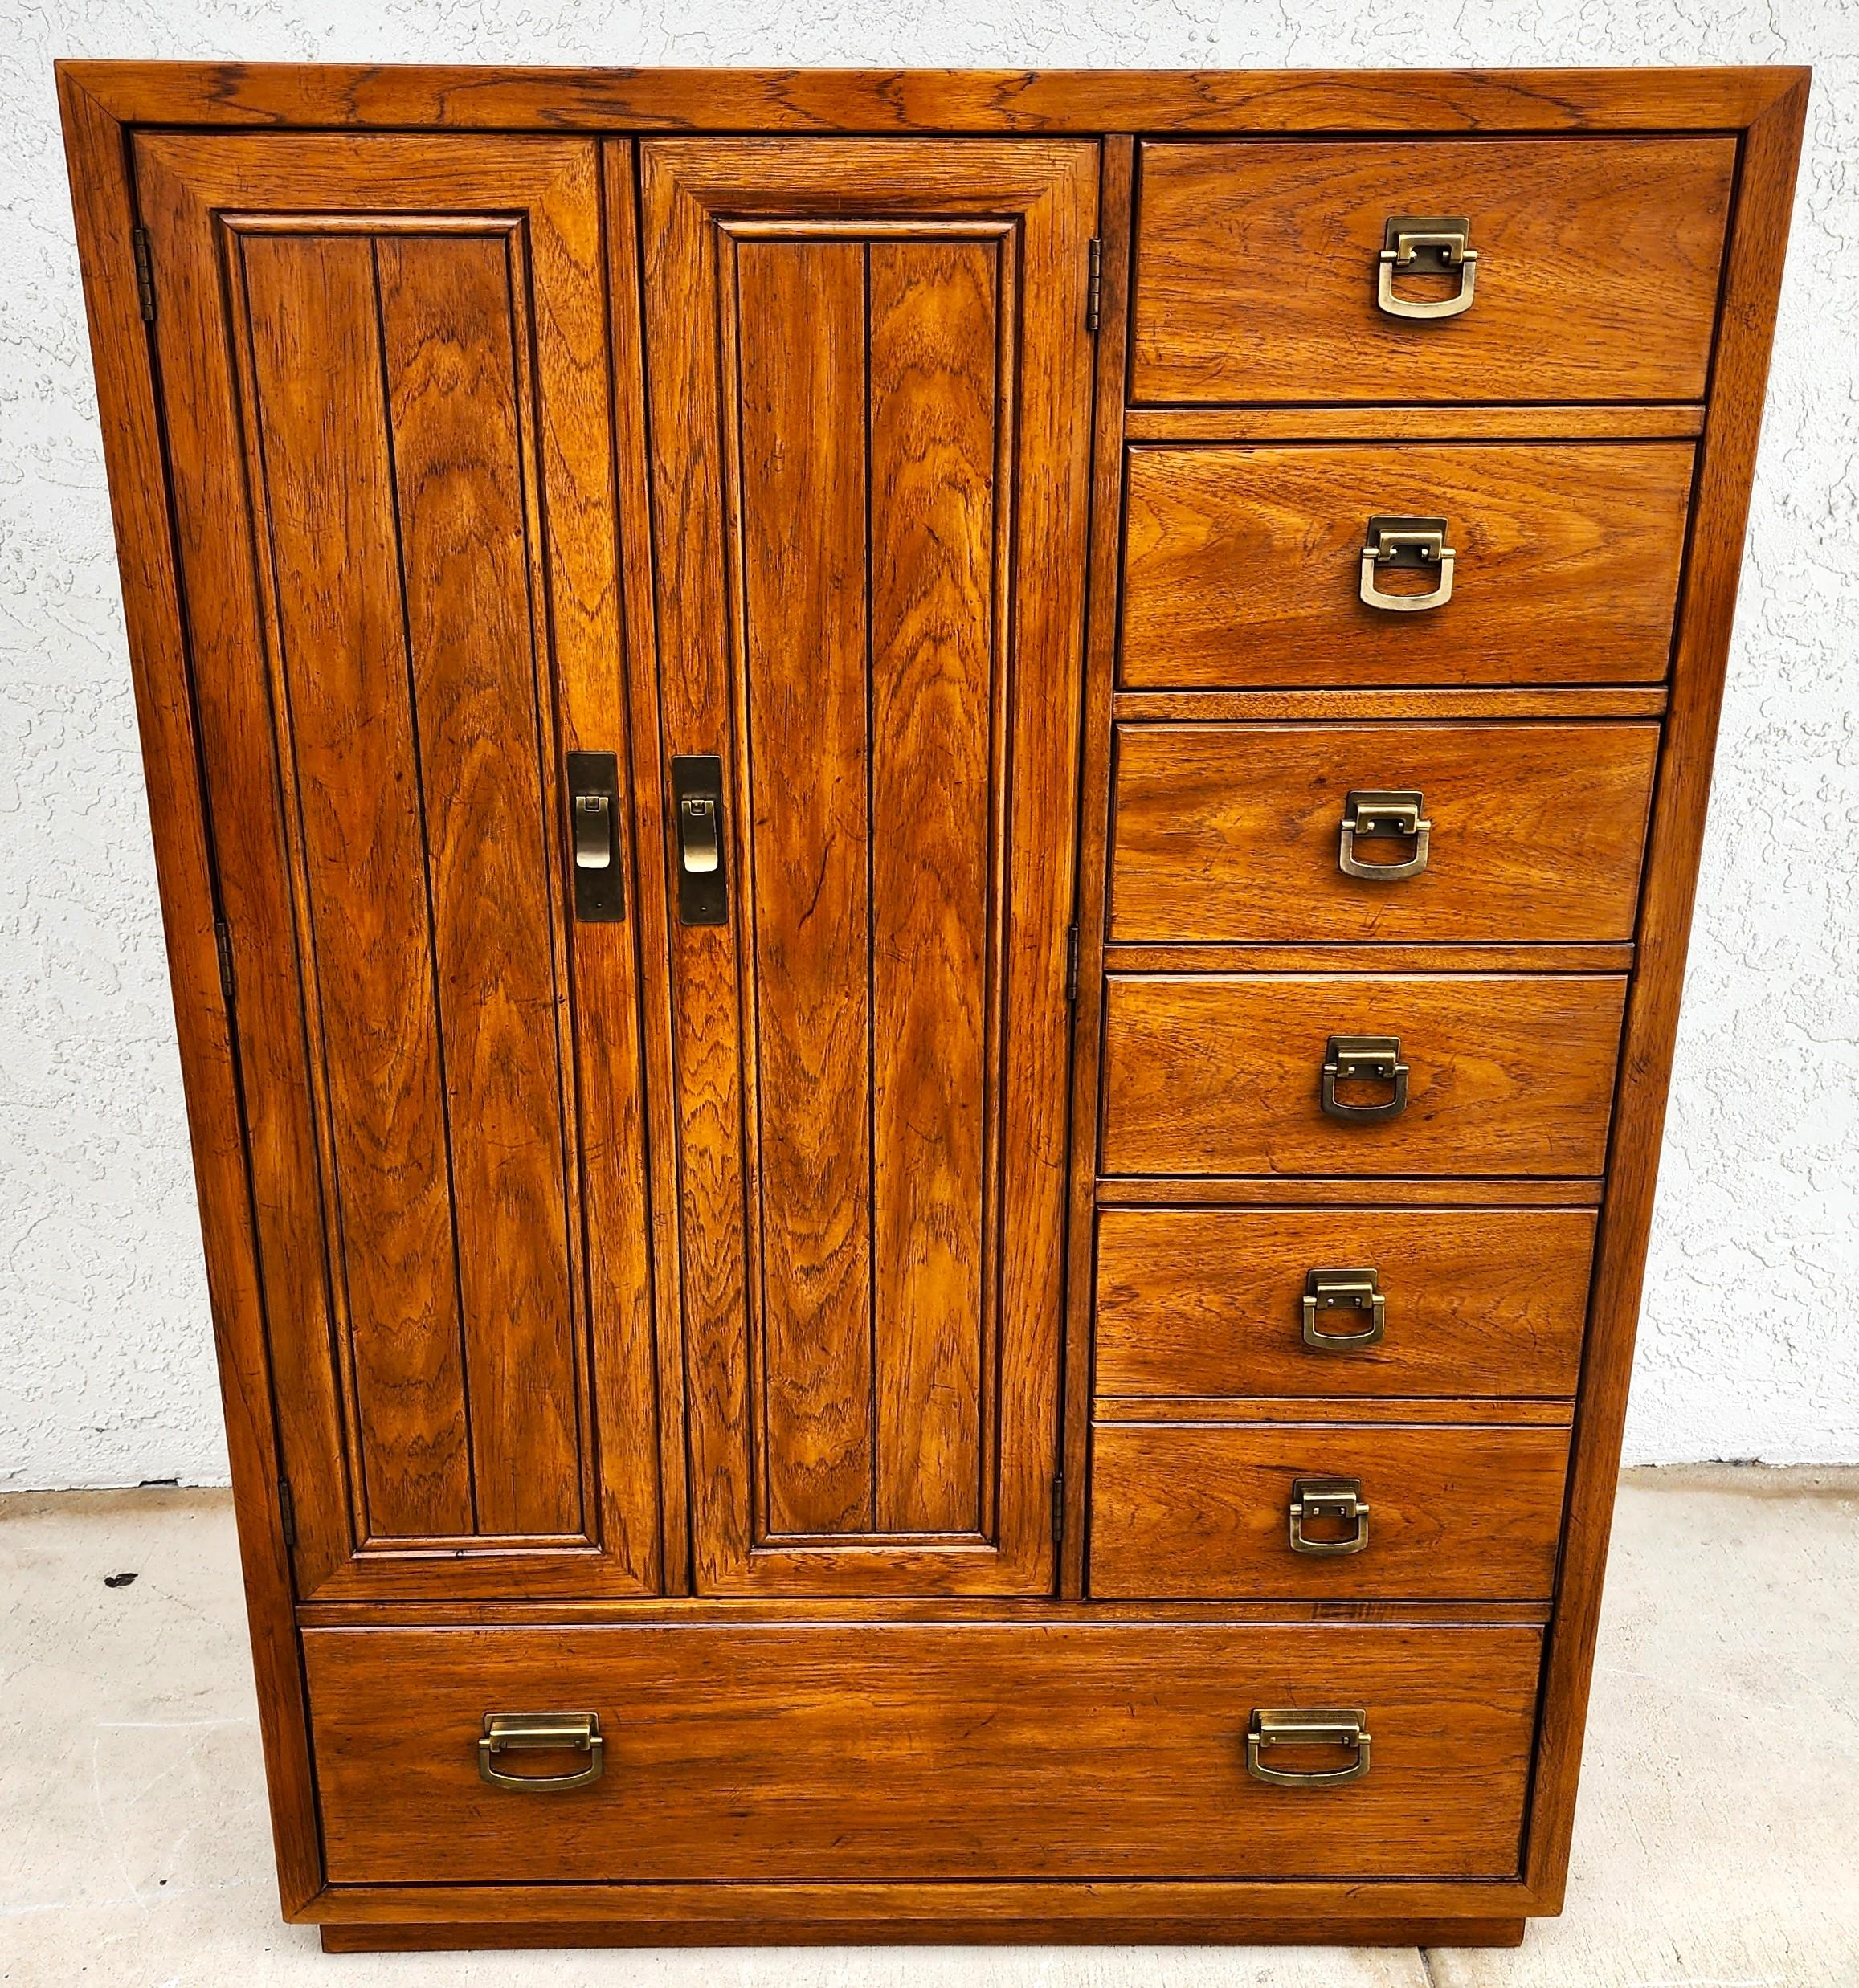 For FULL item description click on CONTINUE READING at the bottom of this page.

Offering One Of Our Recent Palm Beach Estate Fine Furniture Acquisitions Of A
MCM Highboy Dresser Wardrobe WINDWOOD by Drexel
Shelves are adjustable/removable.

We also